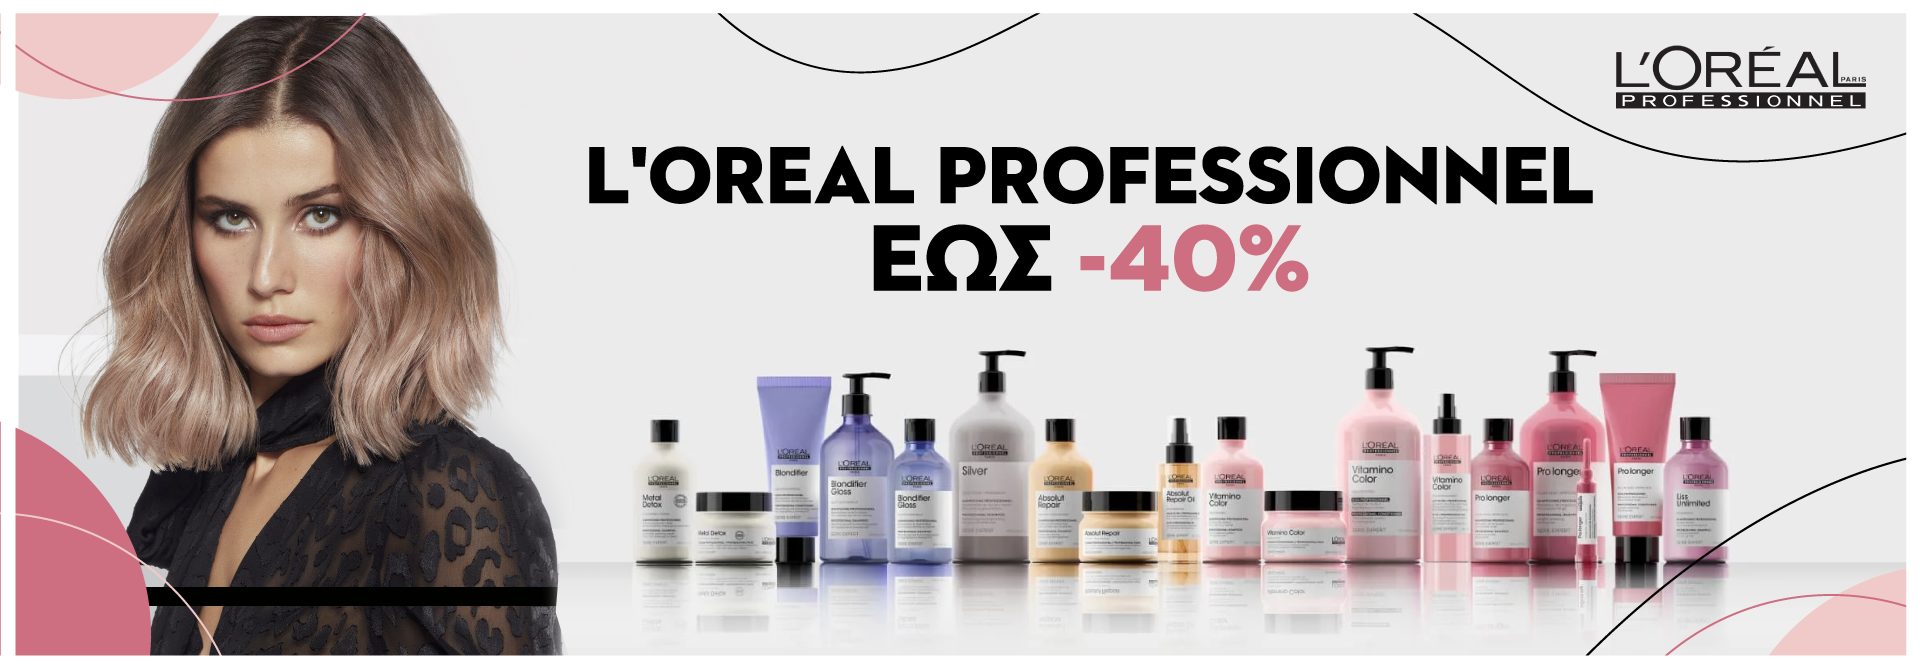 brand page loreal professionnel -40%